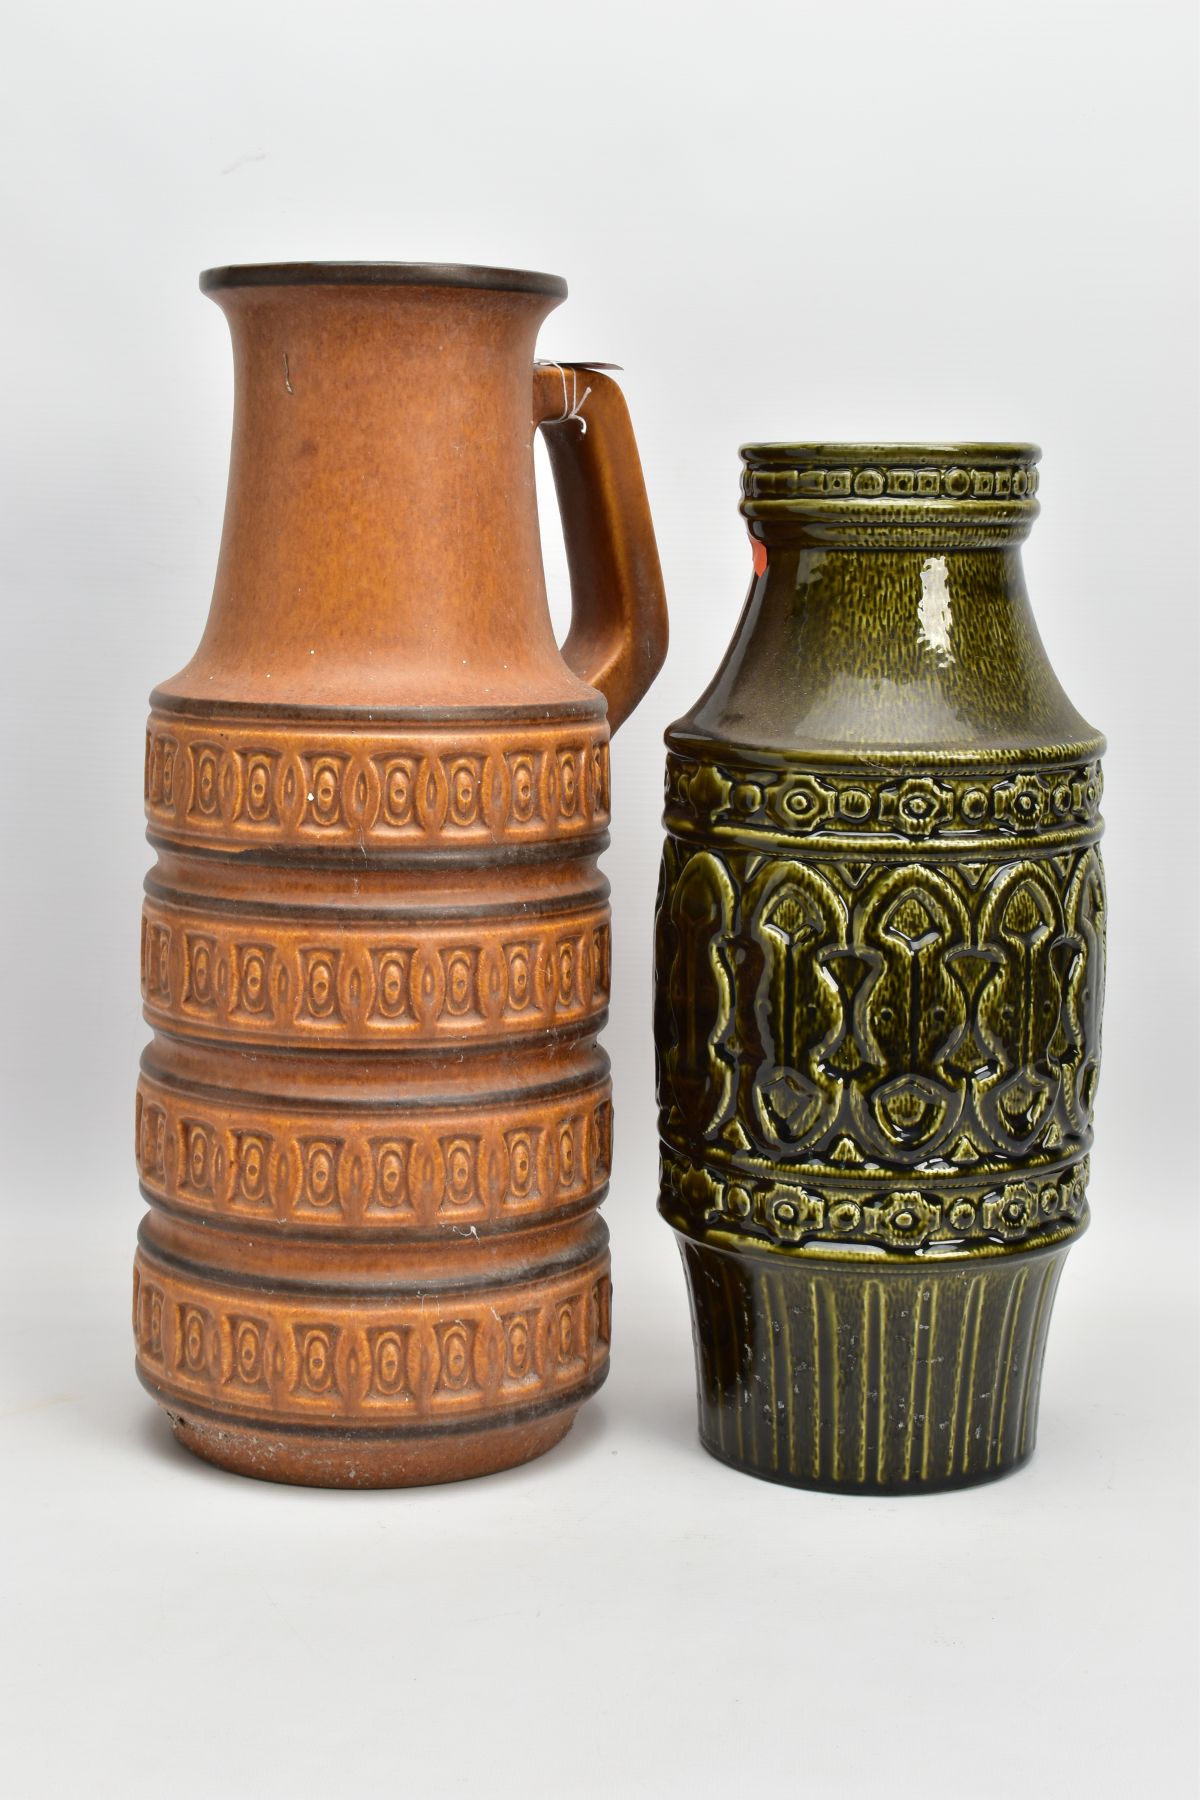 A WEST GERMAN POTTERY JUG WITH AN ART POTTERY VASE, the West German jug measuring 45cm high, being - Image 4 of 6